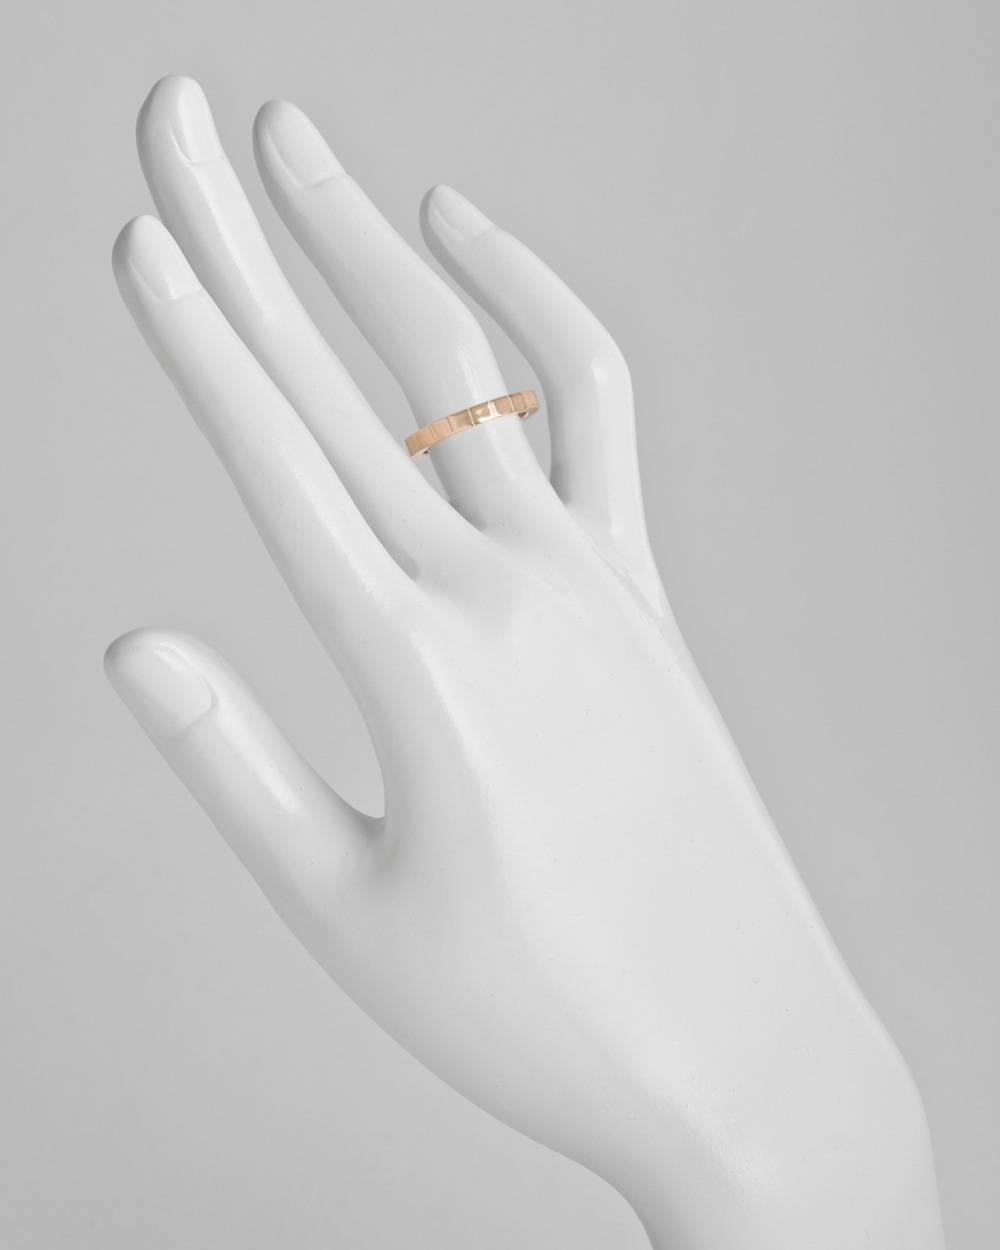 "Lanières" slender band ring, designed as a continuous sequence of square motifs, in high-polished 18k pink gold, numbered ER9181 and signed Cartier. 3mm band width. Size 5.75 (51 - European). This ring cannot be resized.
